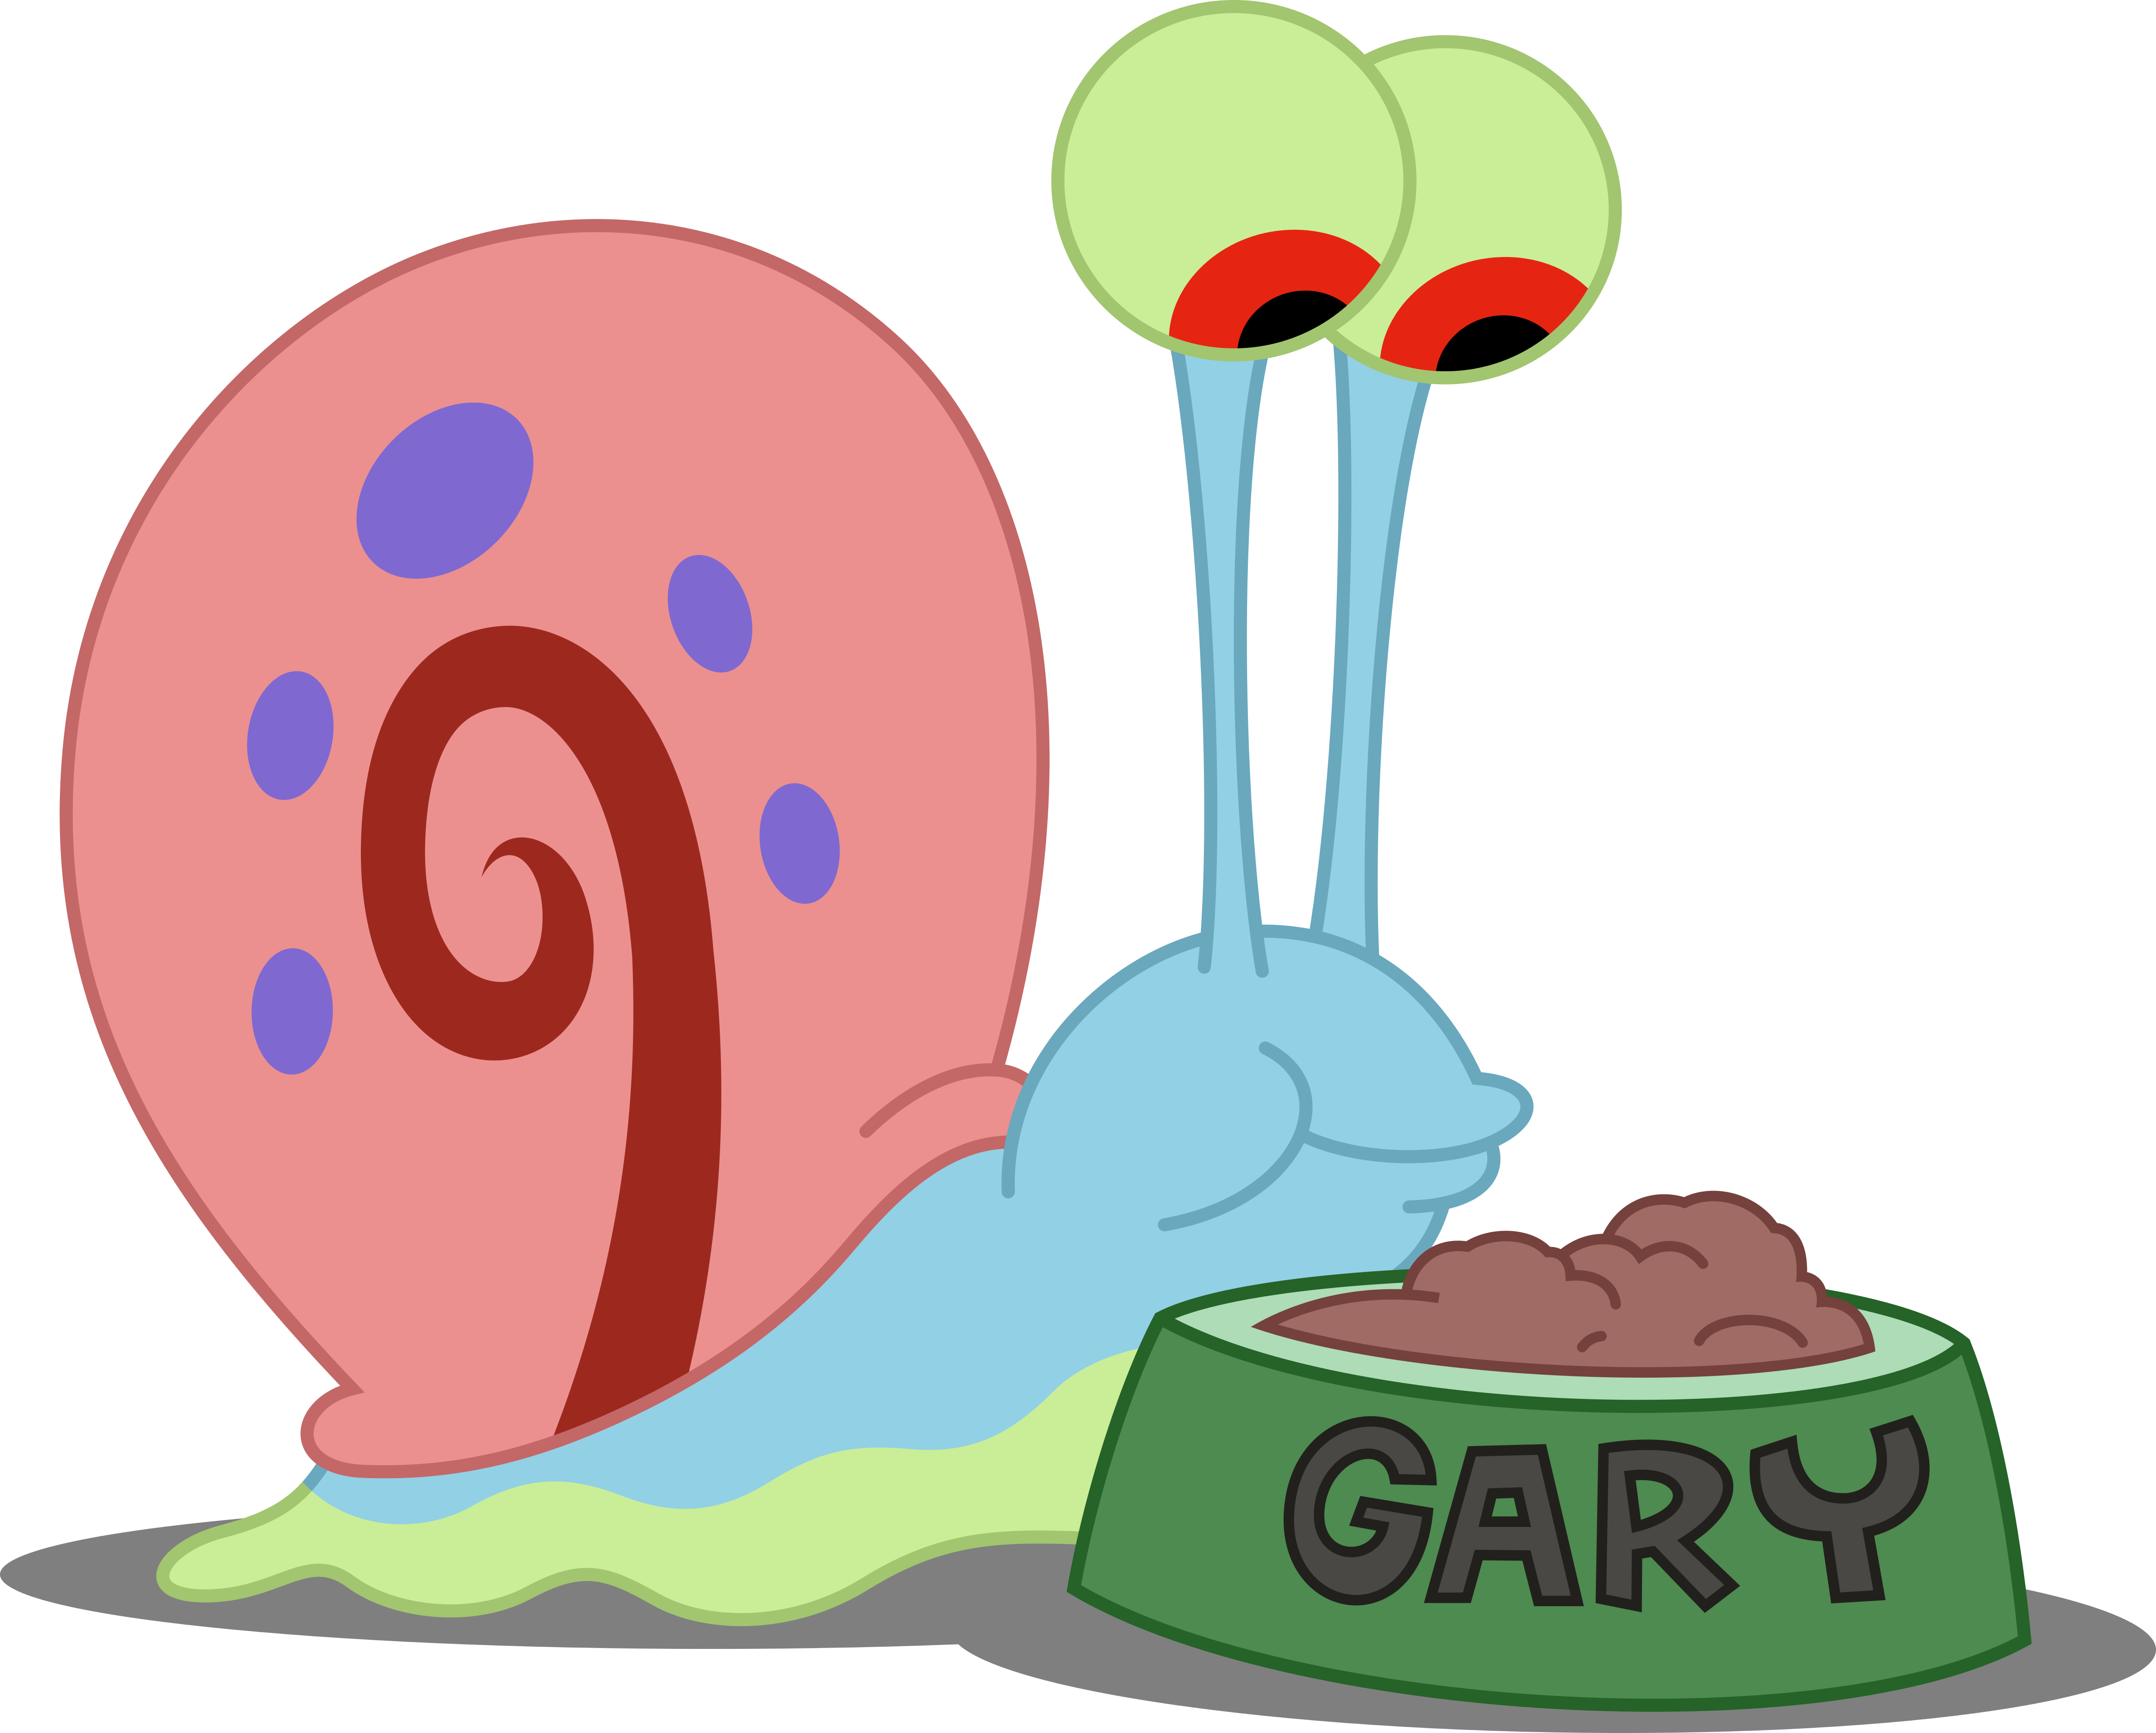 Download and share clipart about Dashiesparkle Vector - Gary The Snail Png,...